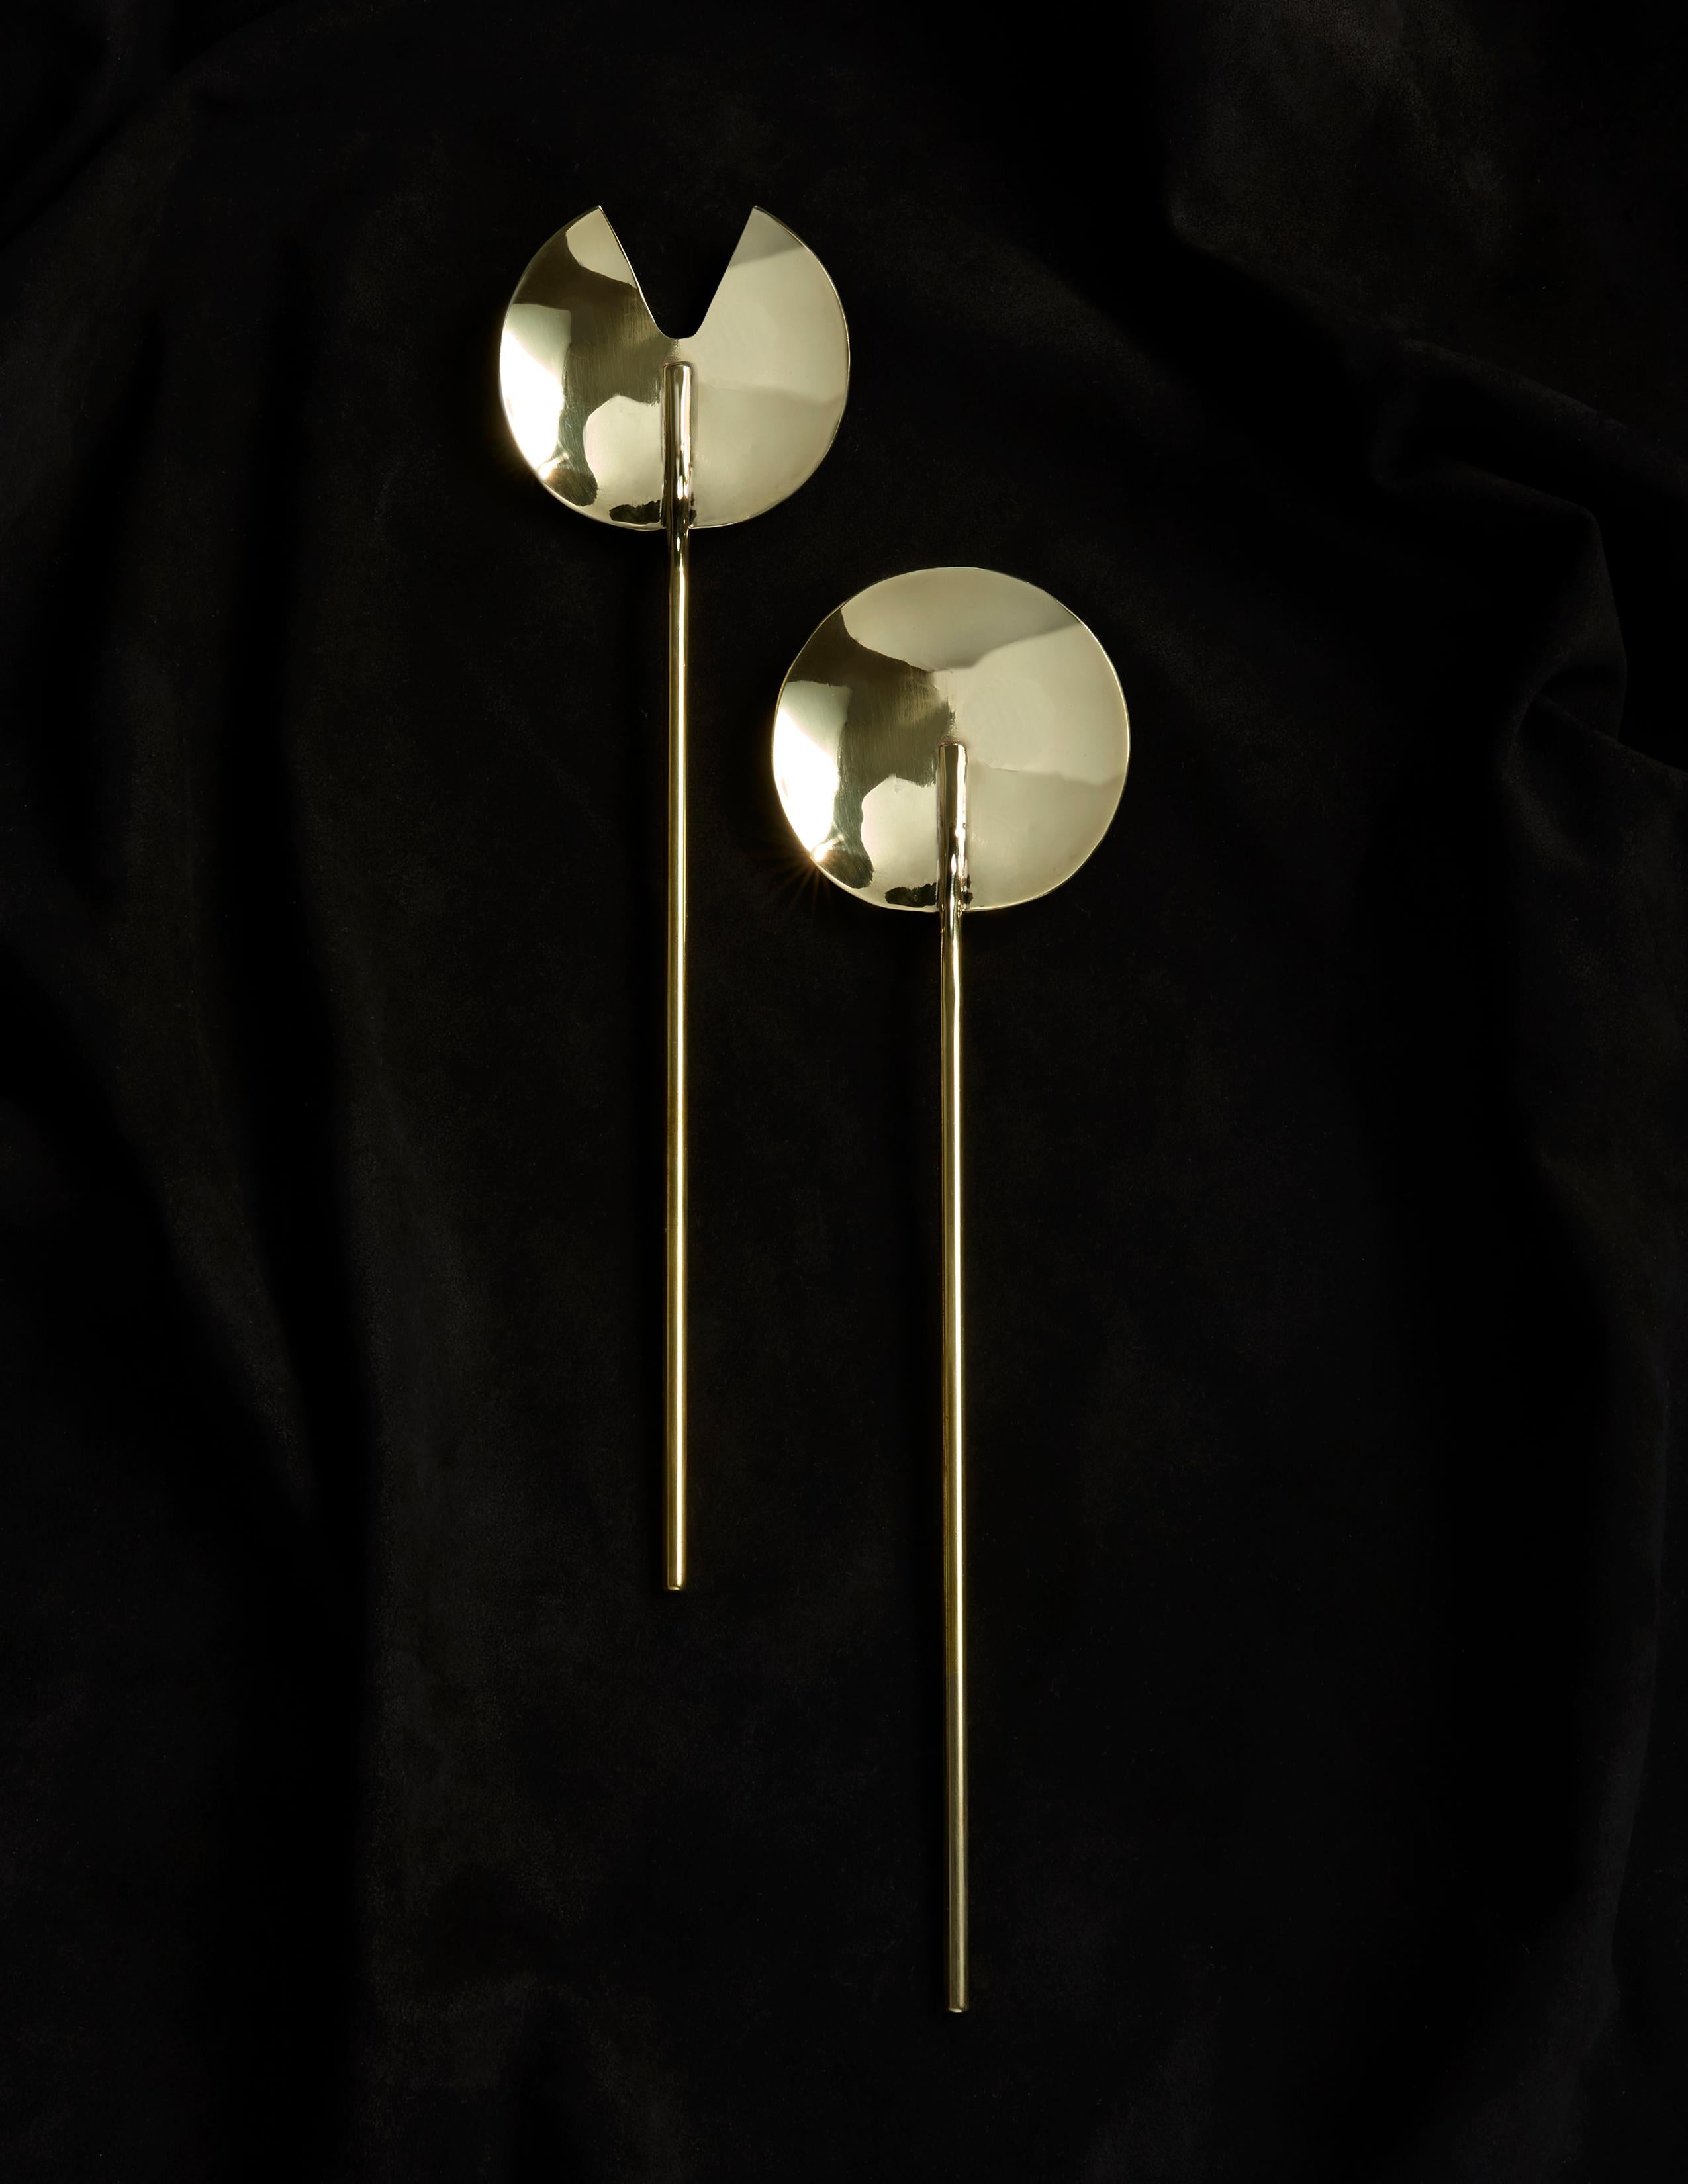 Handcrafted in Brooklyn by Heath Wagoner of HW. Studio, these modern high-polish brass salad servers are a stunning addition to any table setting. With a sleek and contemporary design, these salad servers are perfect for both casual and formal